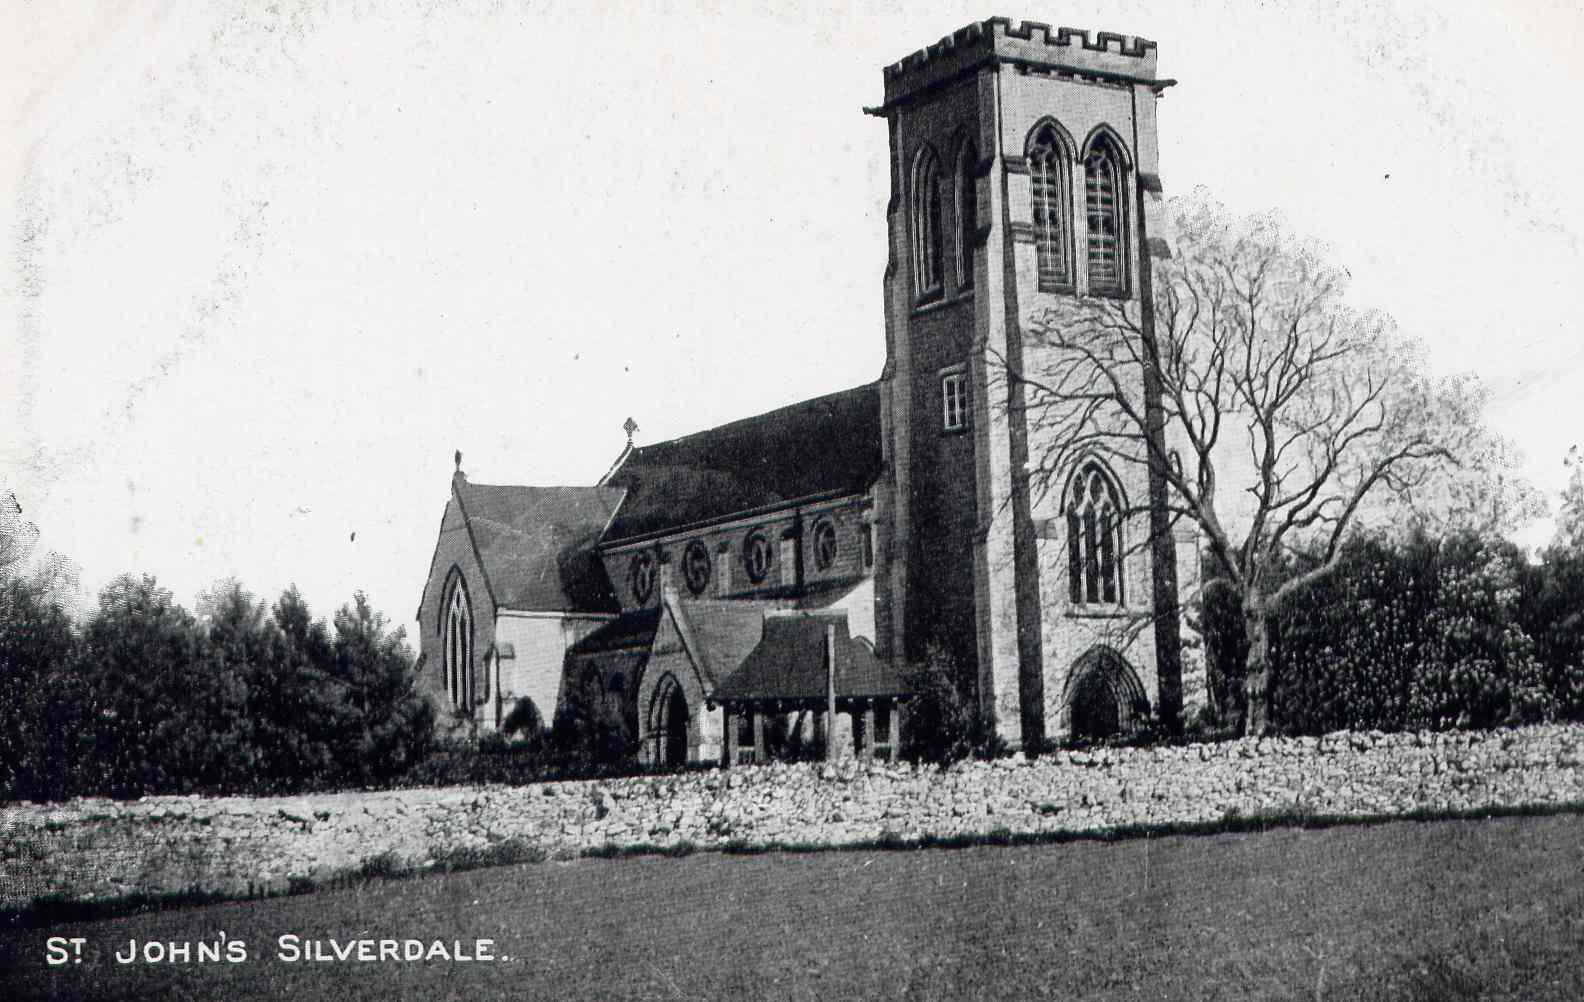 St John's, Silverdale, from an old post card